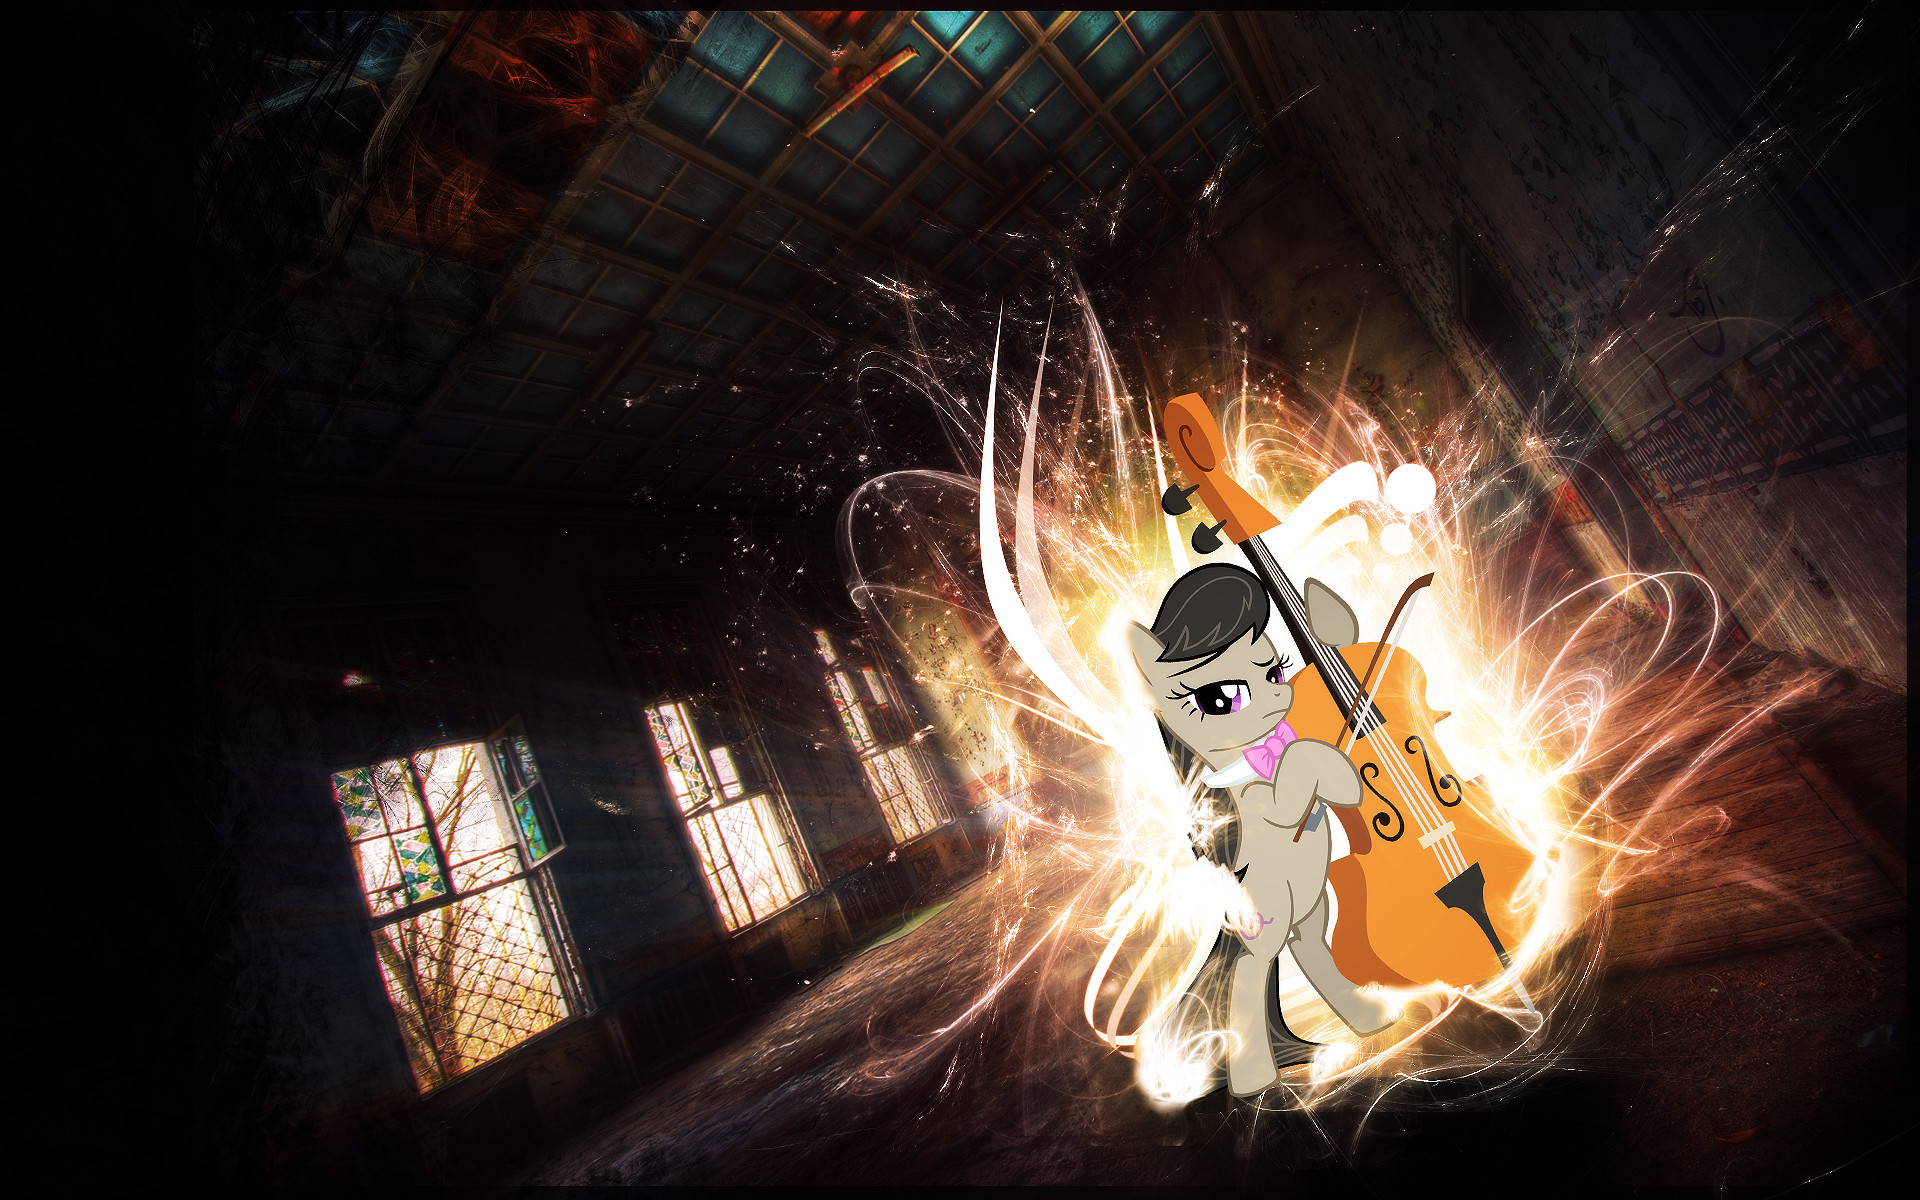 1920x1200 Octavia images Octavia Playing the Cello HD wallpaper and background photos